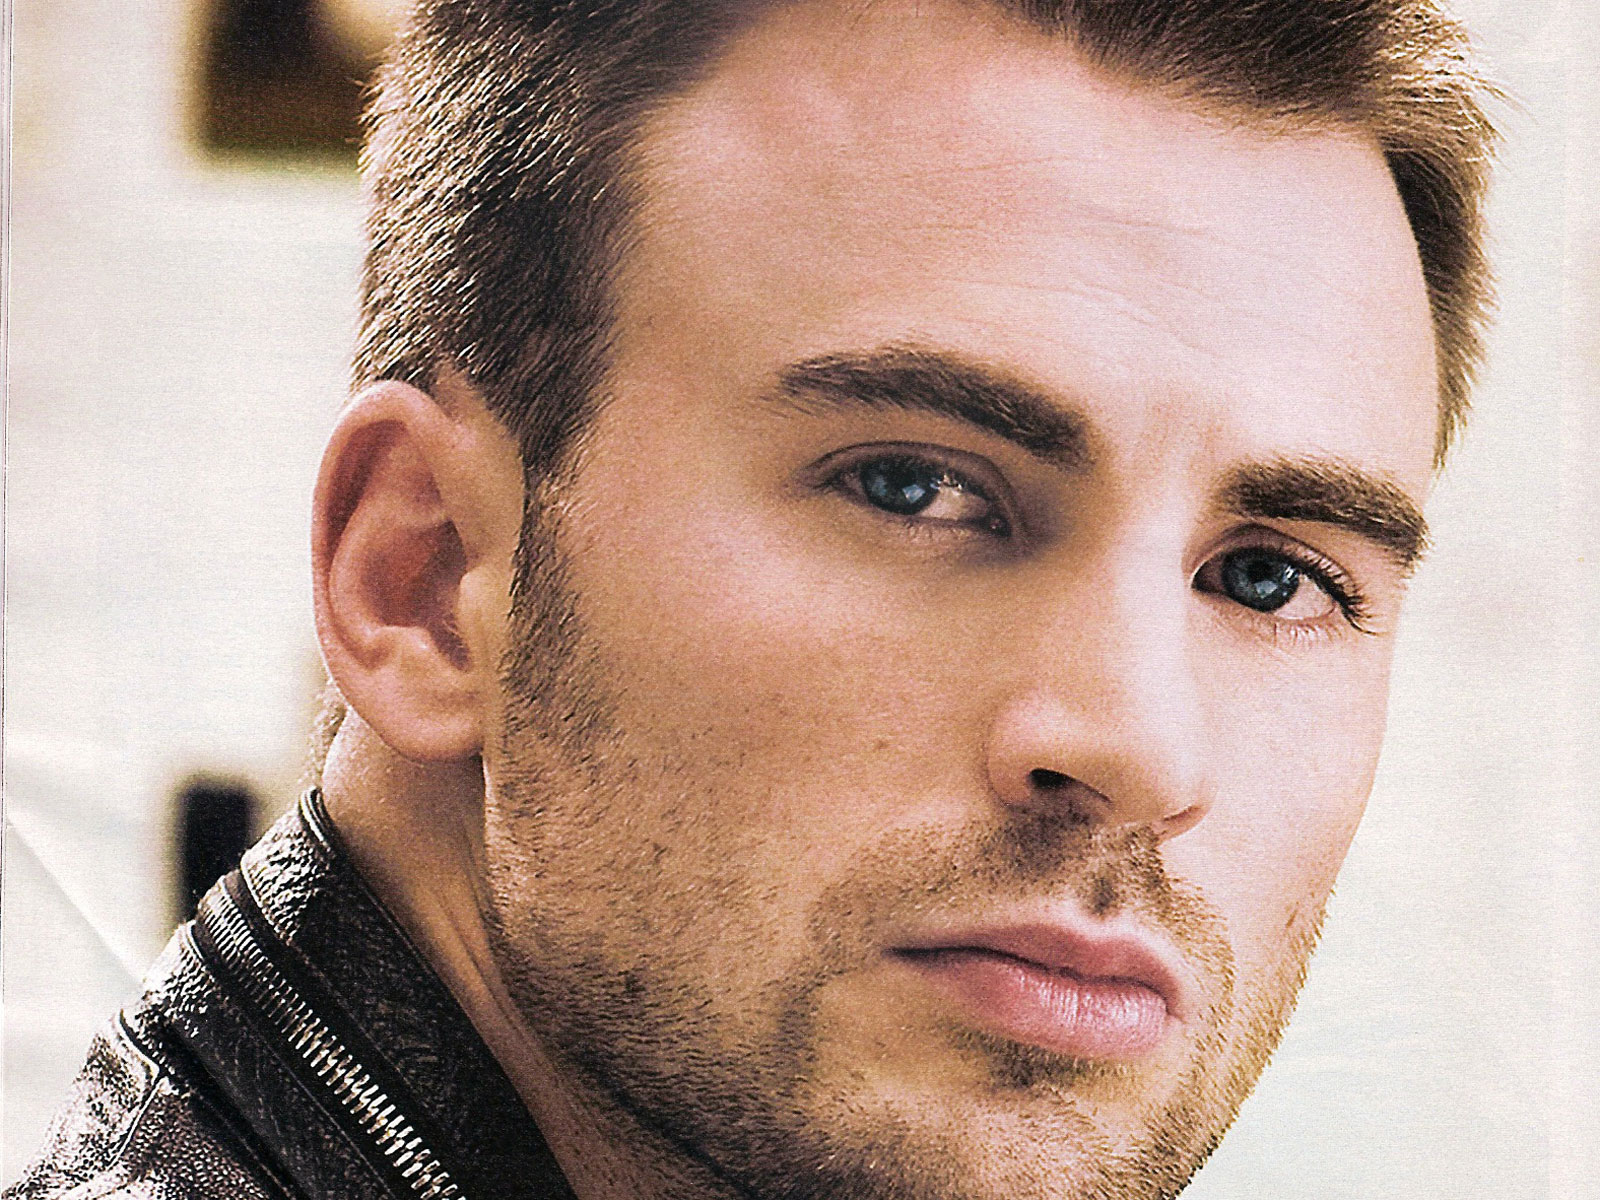 Chris Evans Actor  Wallpaper, High Definition, High Quality 